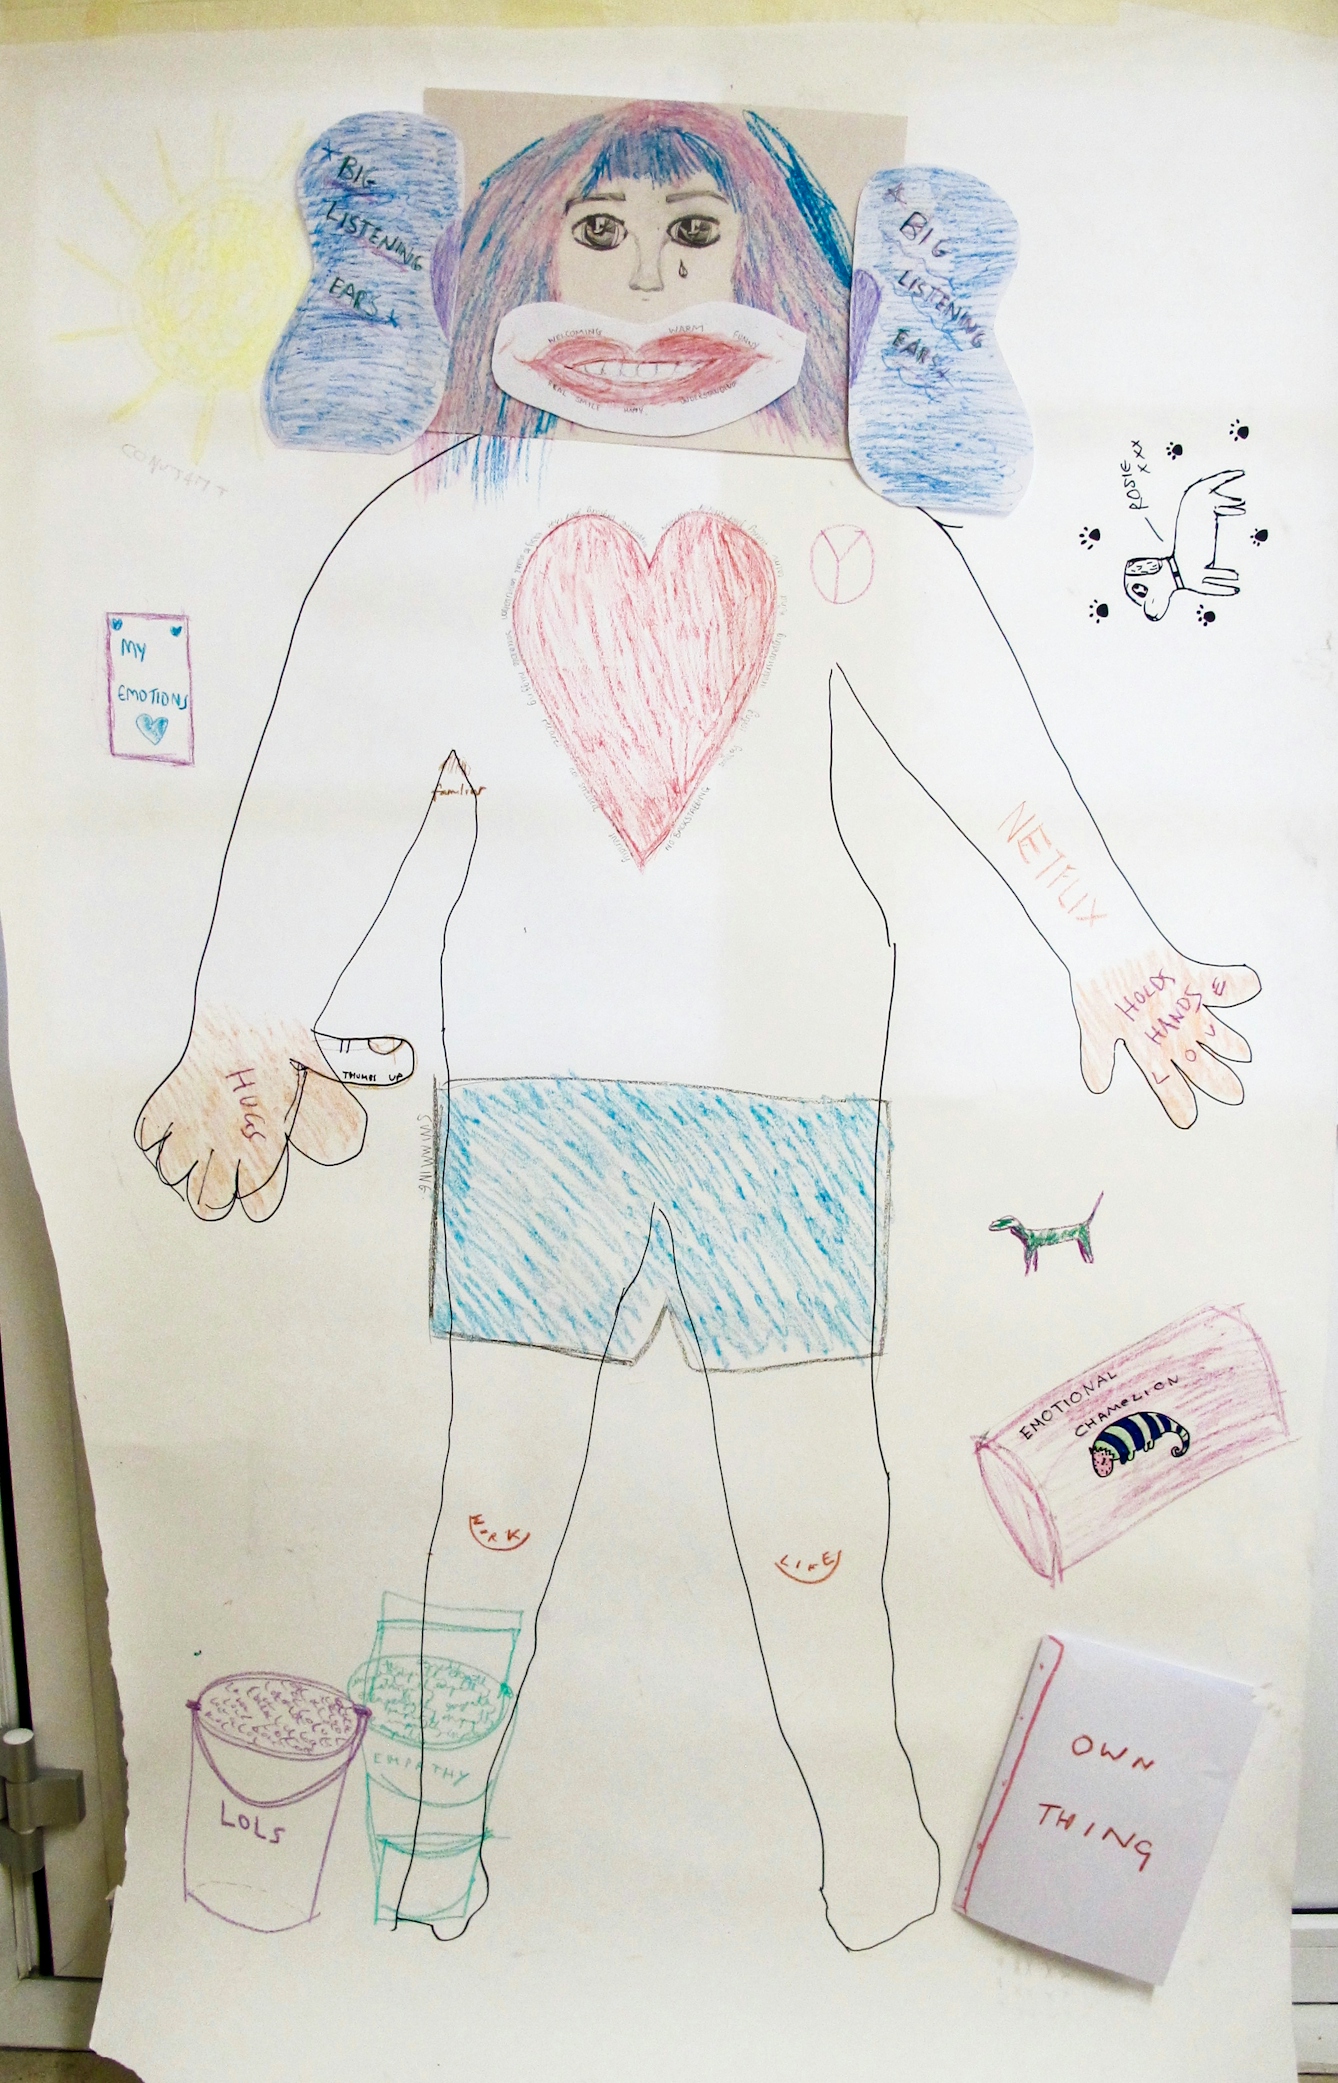 A photograph showing the outline of a person drawn in black marker pen on poster paper completed with colouring pencils. The head is made up of different drawings on separate sheets of paper stuck together with pink and blue shoulder length hair, large green eyes, and a single tear on her cheek. There are large ears coloured blue, labelled ‘big listening ears’, and a smiling mouth around which ‘welcoming’, ‘warm’, ‘funny’, ‘real smile’, ‘happy’ and ‘understanding’ are written. On the body there is a large red heart surrounded with more words and phrases describing the perfect carer, and a CND ‘peace’ symbol. On the hand shown on the left is written ‘hugs’ as well as ‘thumbs up.’ On the other, is written ‘holds hands’, and ‘love’ spelt out on the knuckles. Netflix is written on the arm.  The figure wears blue shorts, and ‘swimming’ is written besides them.  ‘Work’ is written on one knee, and ‘life’ on the other. At the feet are buckets with ‘lols’ written on one, and ‘empathy’ on the other. Around the edge of the paper there are various words and drawings including; a dog with paw prints and ‘Rosie xxx’ written by it; a drawing of a chameleon and the words ‘emotional chameleon’ by it; and a book with the words ‘own thing’ written on it.